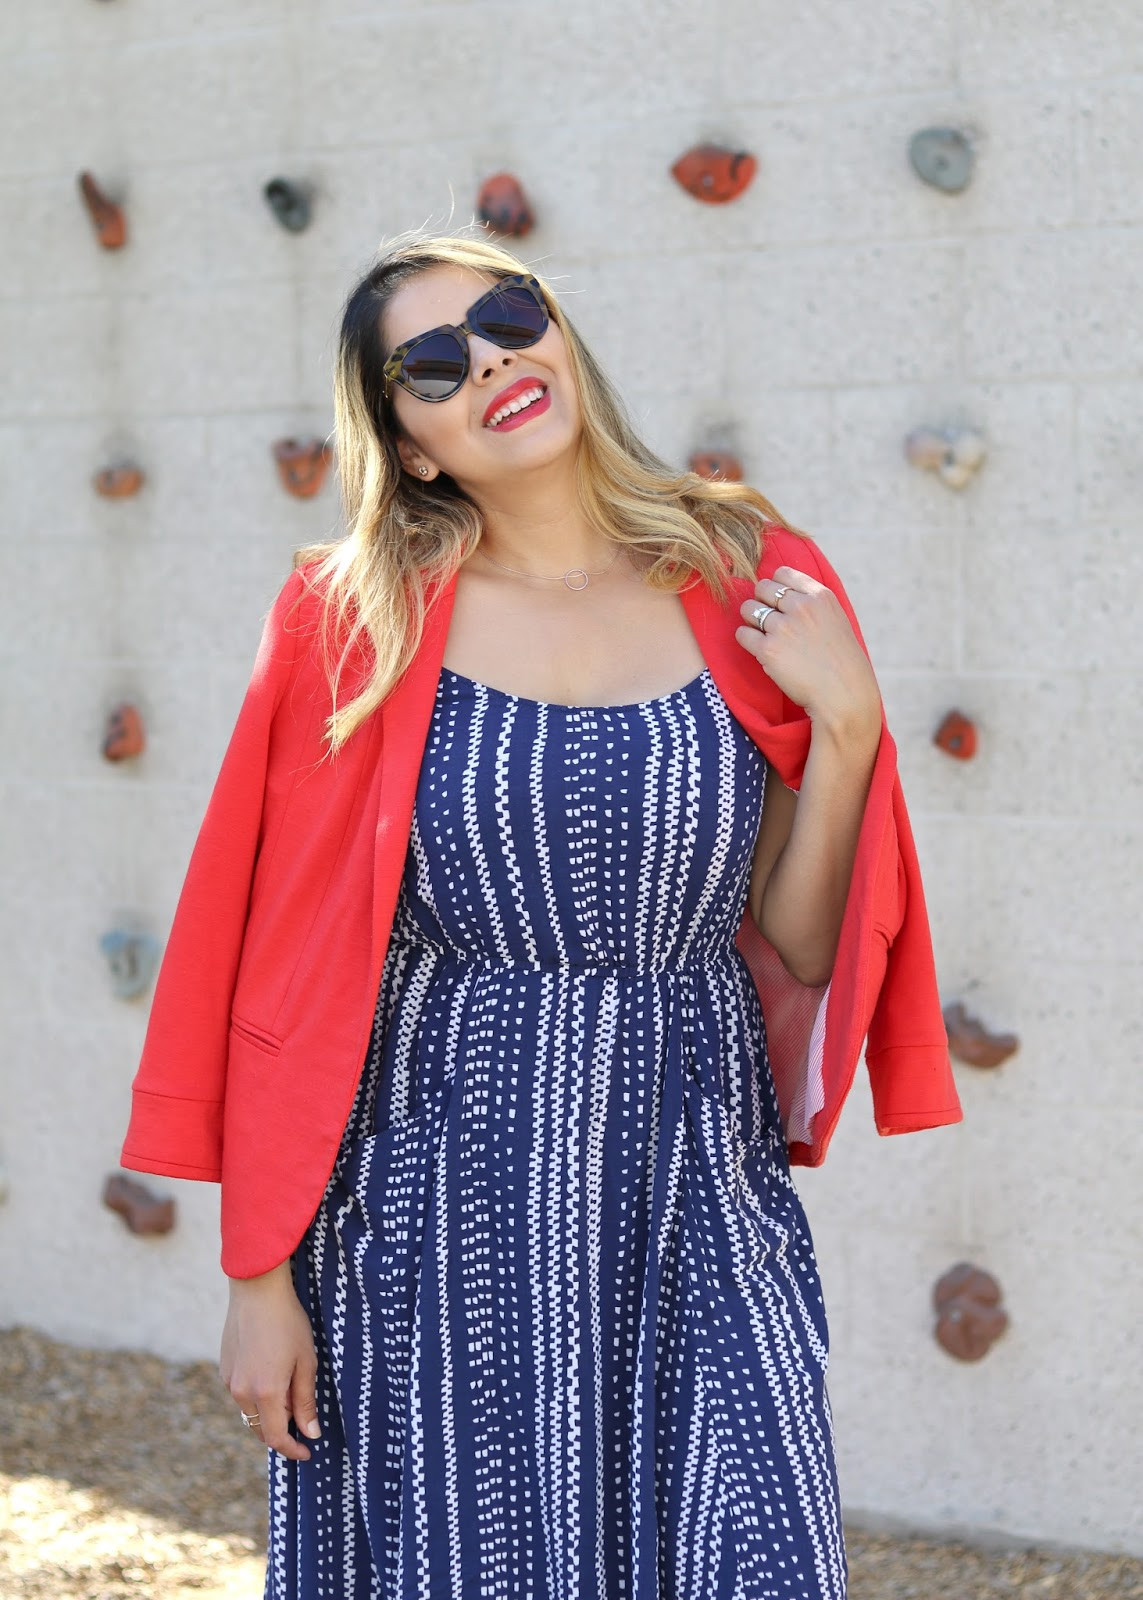 4th Of July Outfit Ideas
 4th of July Outfit Ideas Lil bits of Chic